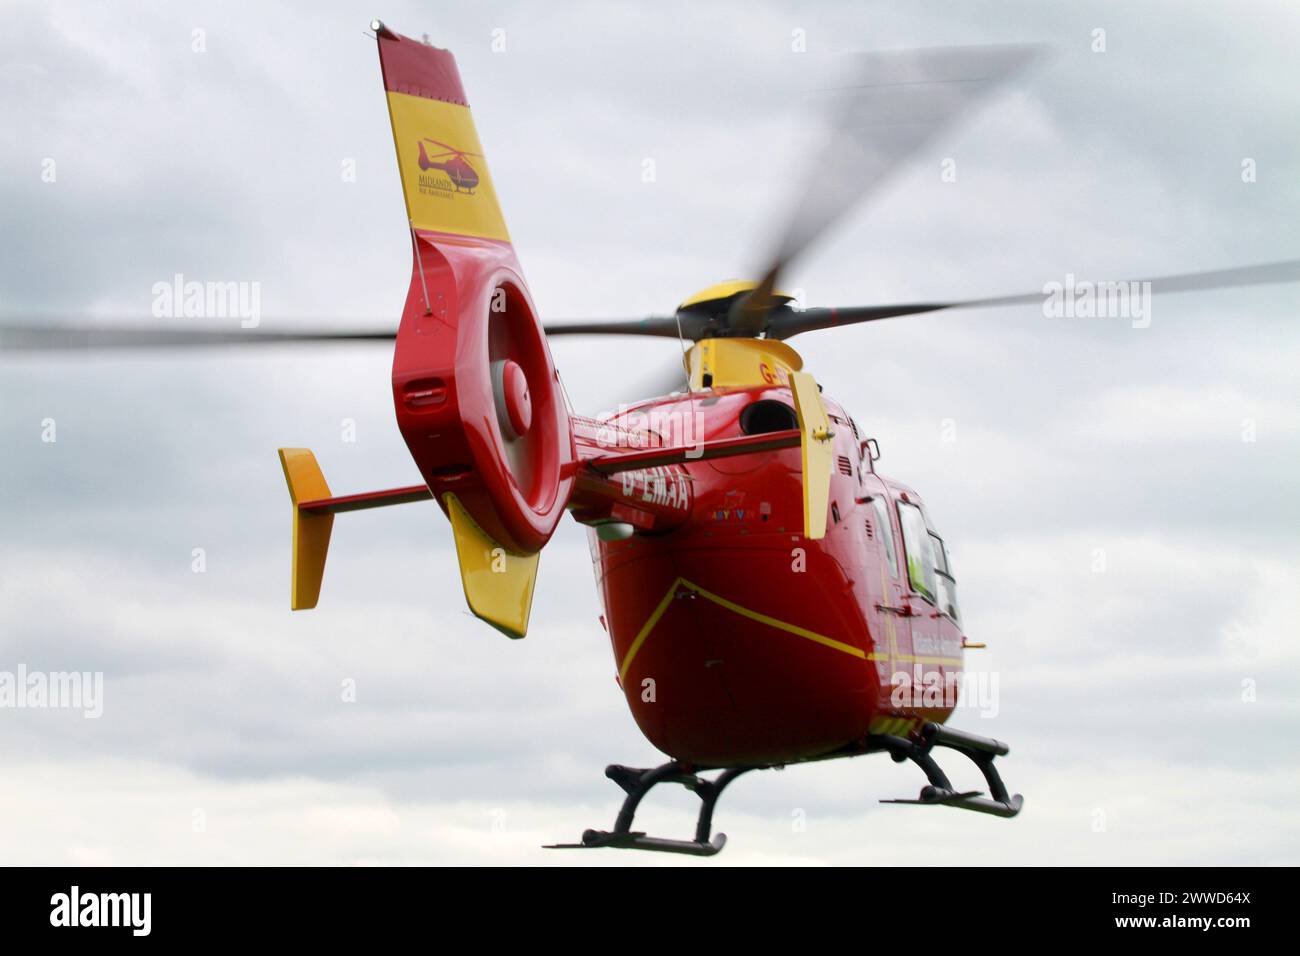 File photo dated 28/04/2012 showing a Midlands emergency Eurocopter EC 135 helicopter on an emergency call at the Staffordshire Showground, Stafford.. Stock Photo